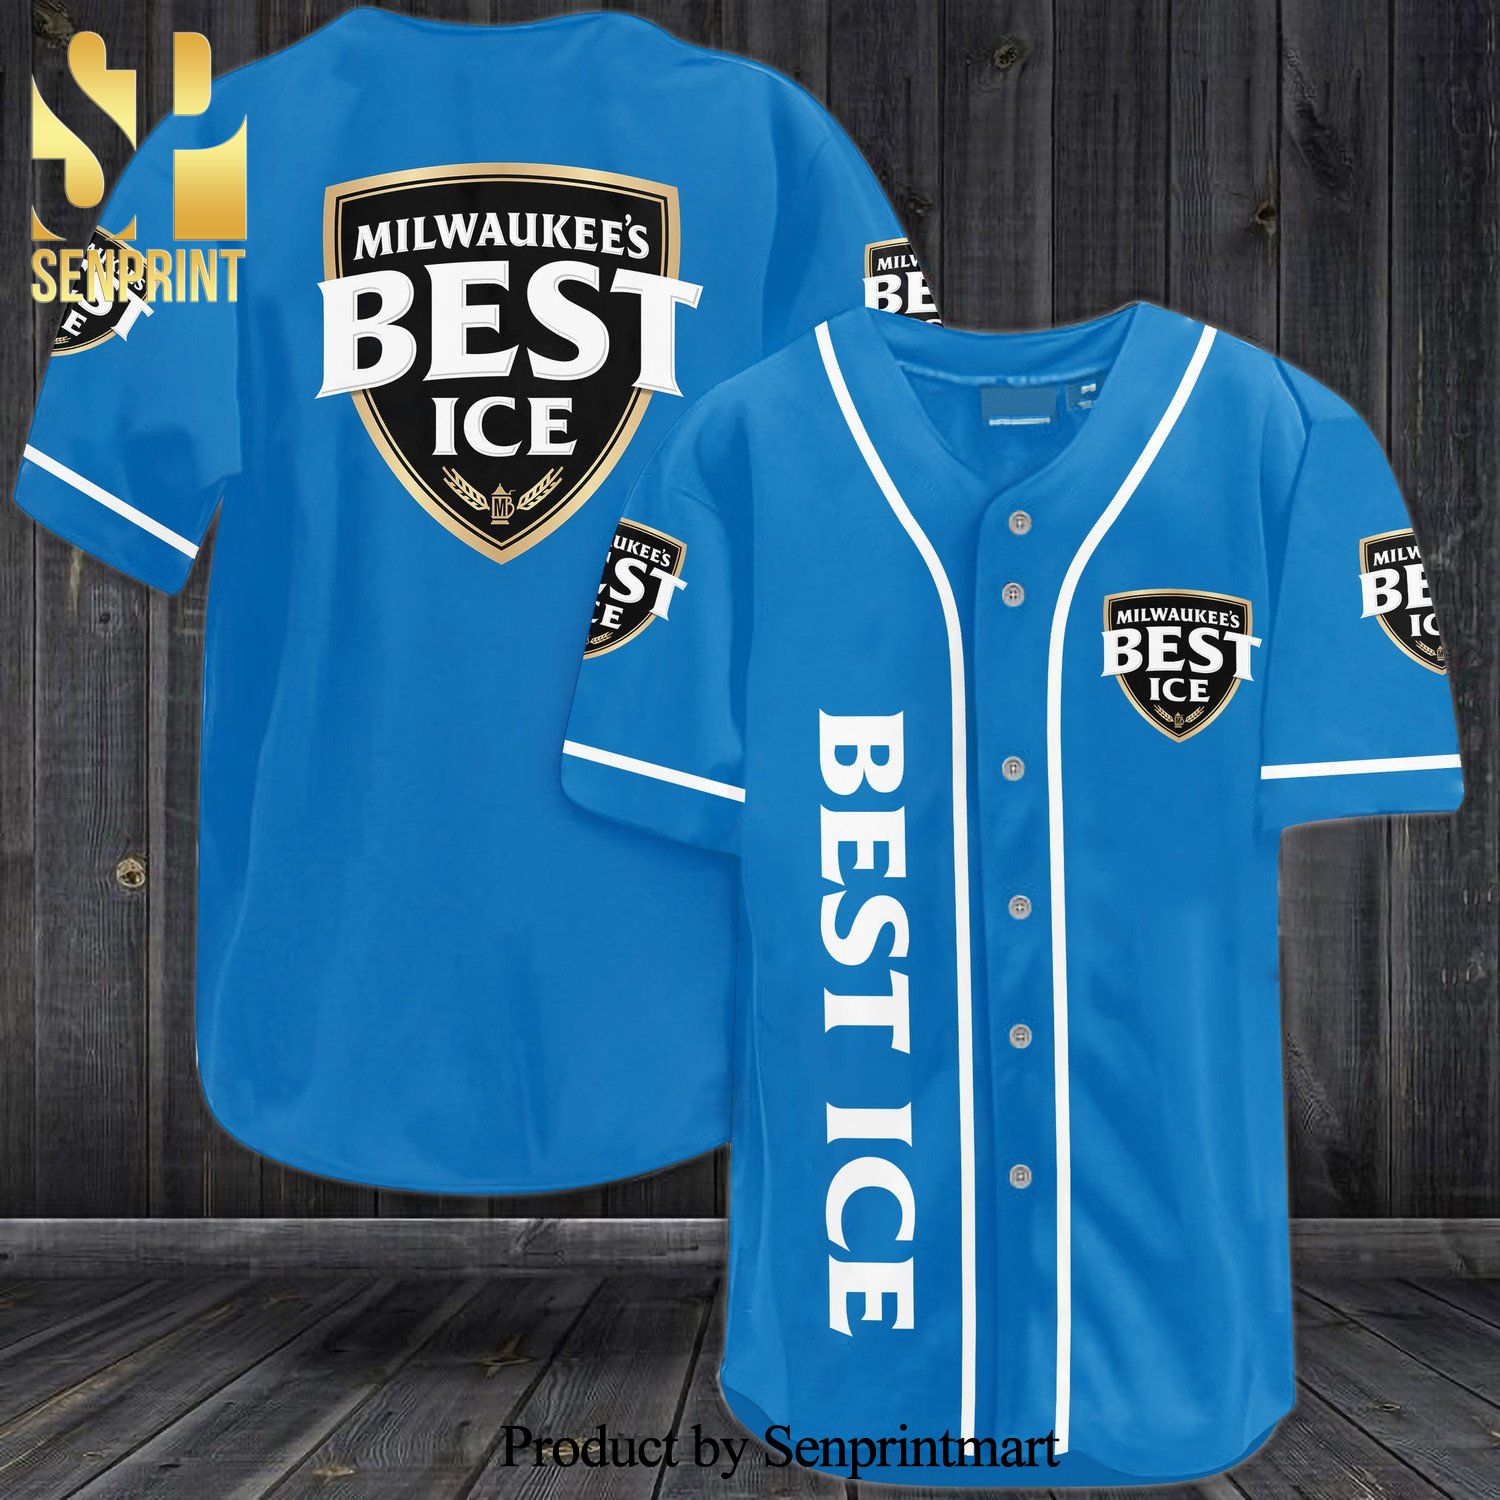 Milwaukee's Best Ice Beer All Over Print Baseball Jersey - Blue